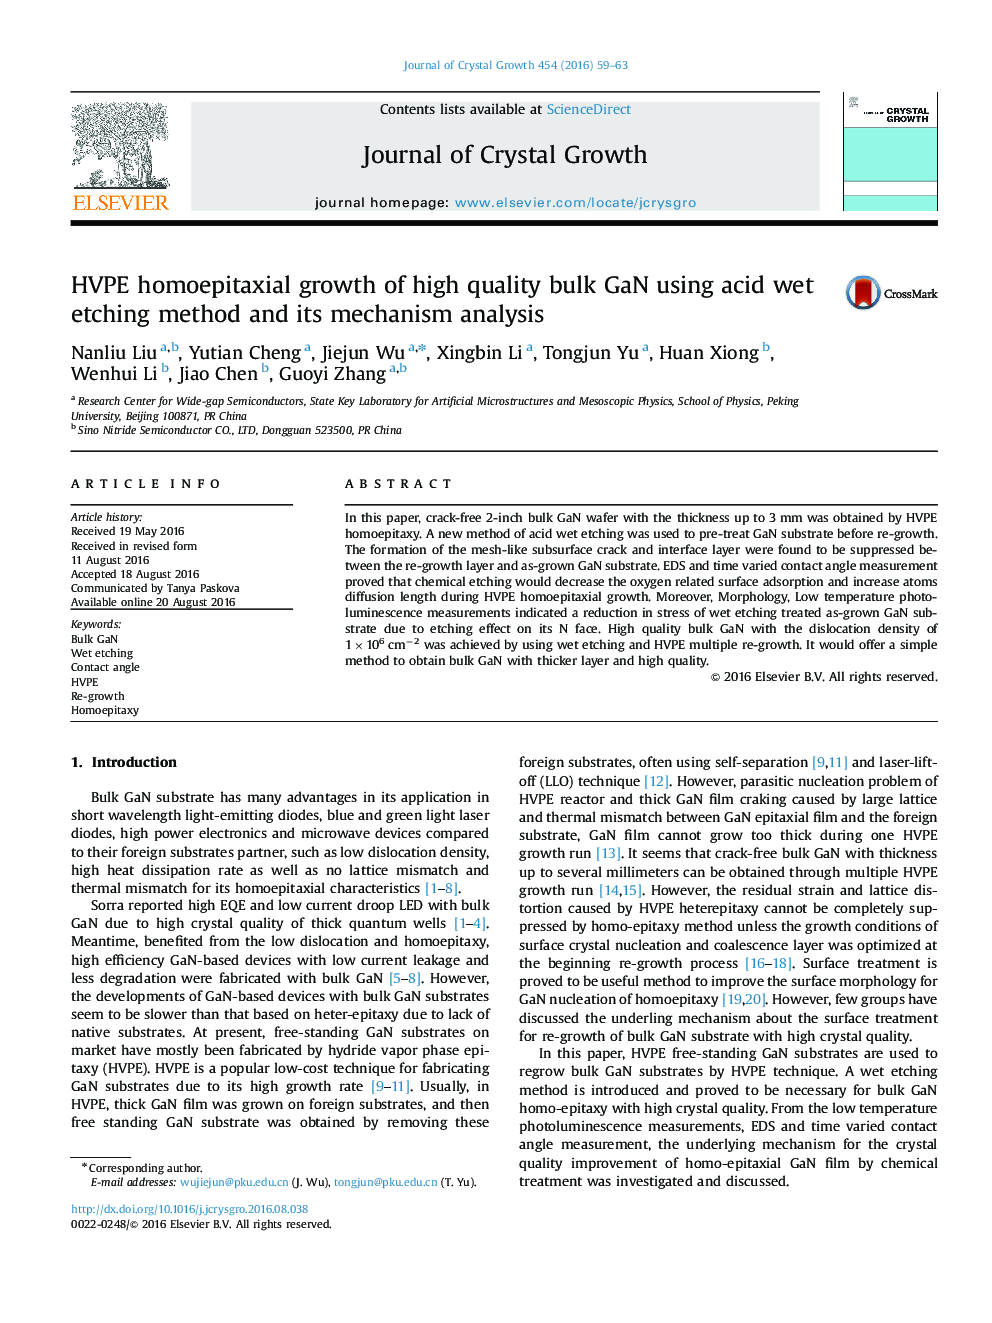 HVPE homoepitaxial growth of high quality bulk GaN using acid wet etching method and its mechanism analysis